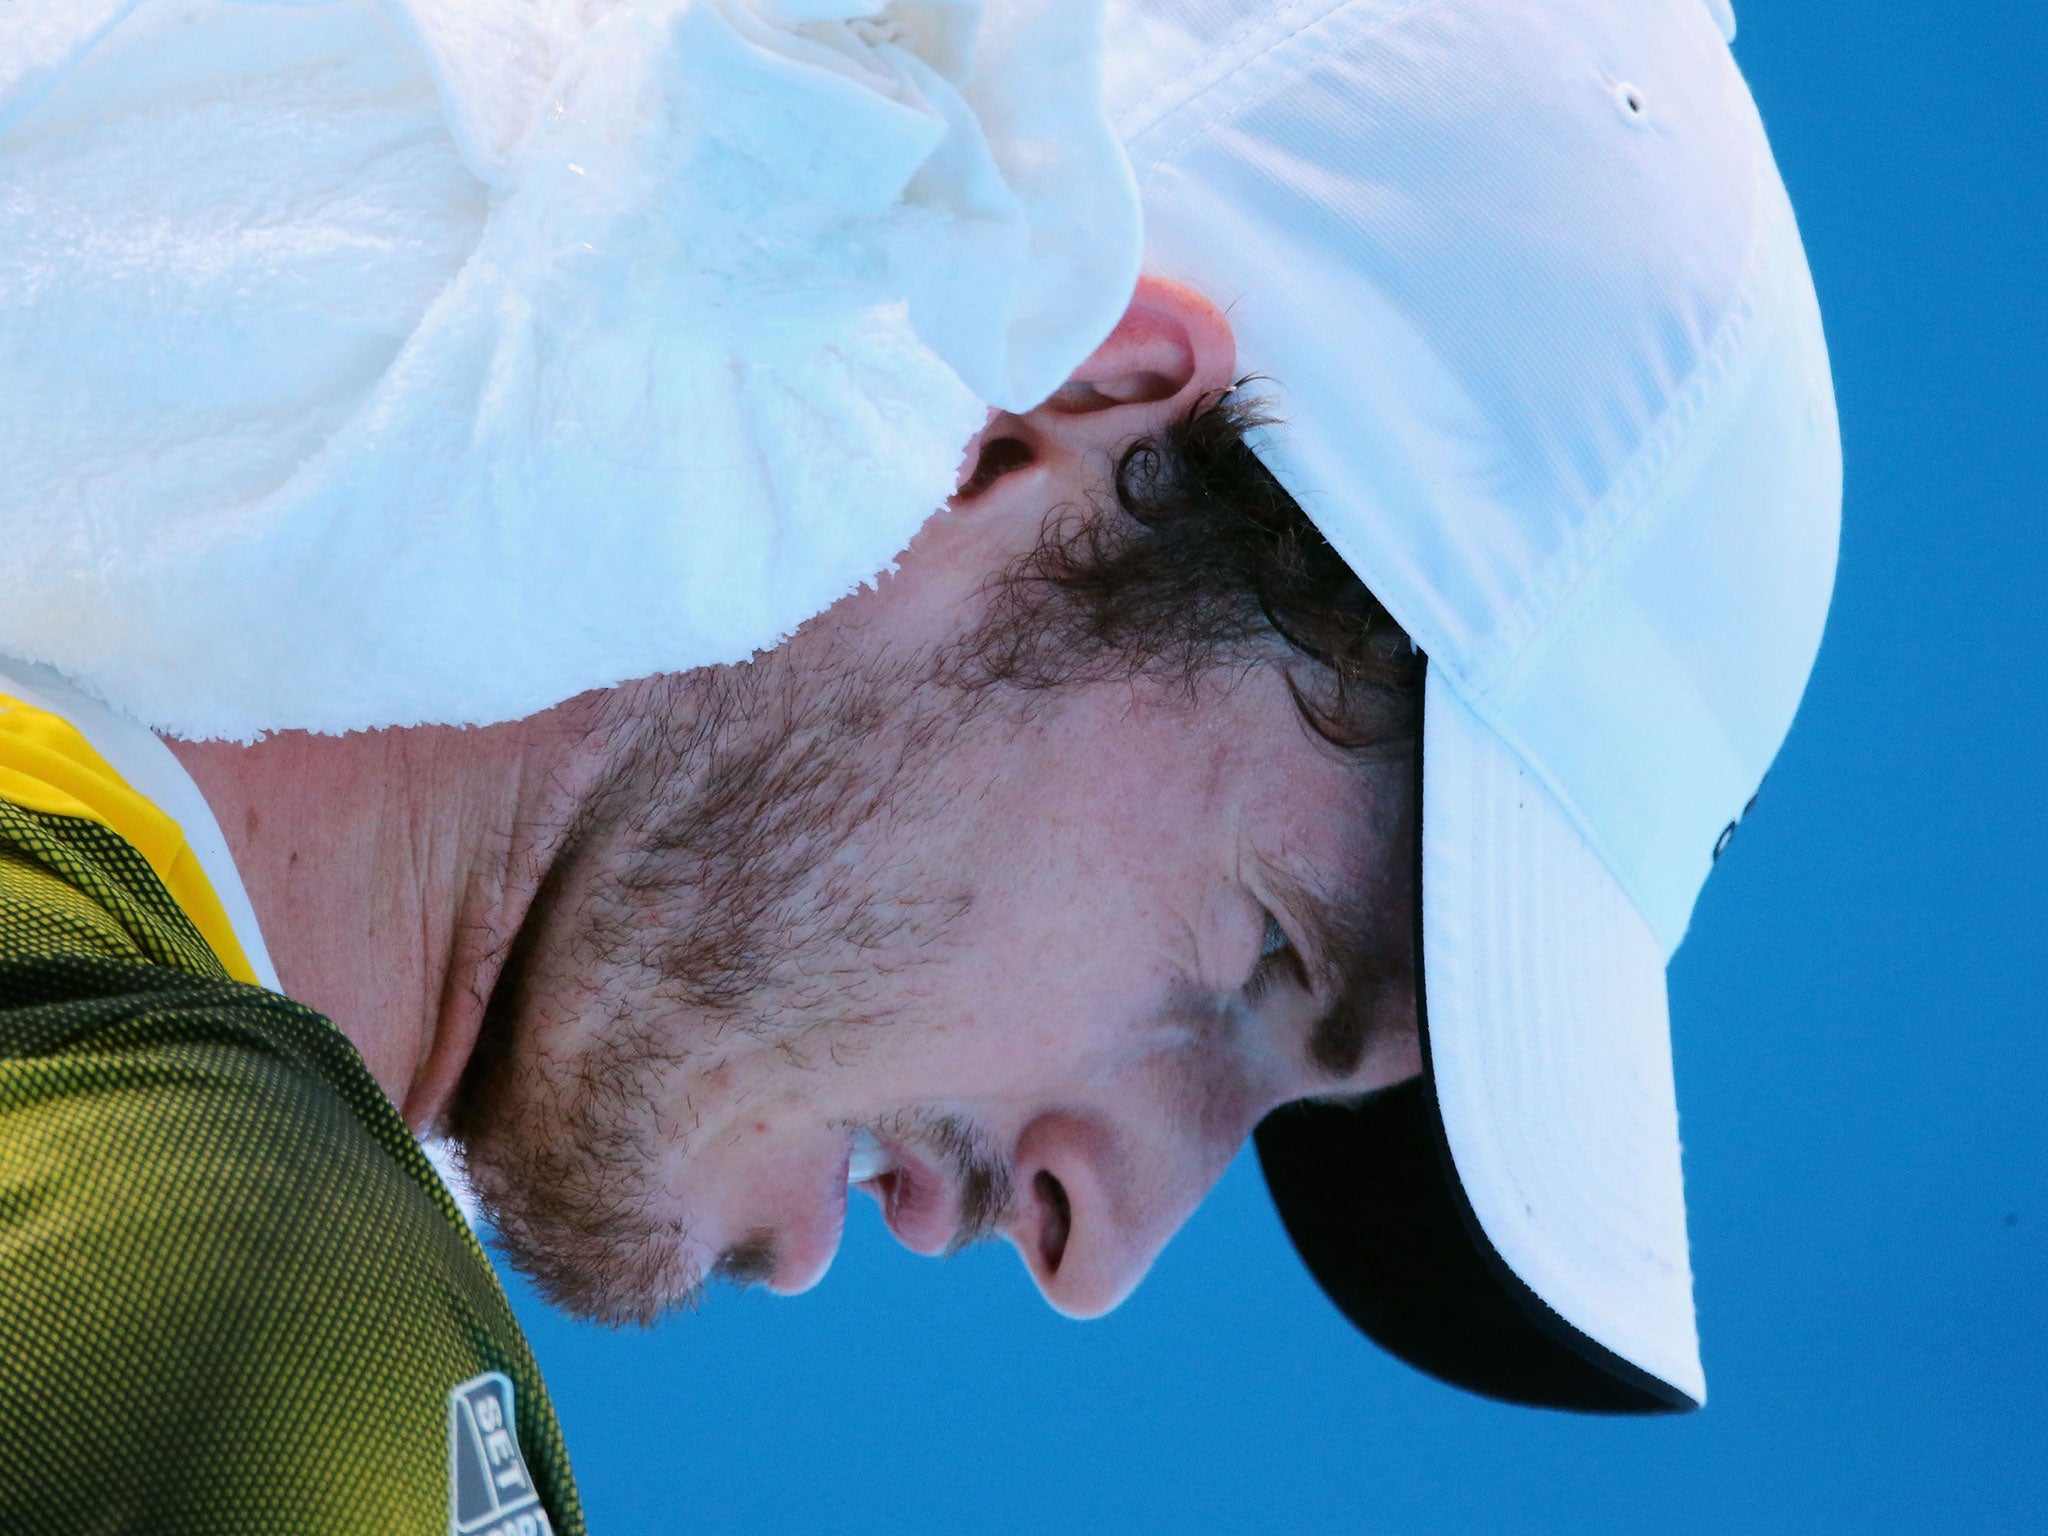 Andy Murray trying to cool down with an ice pack during his match against Joao Sousa at the 2013 Australian Open